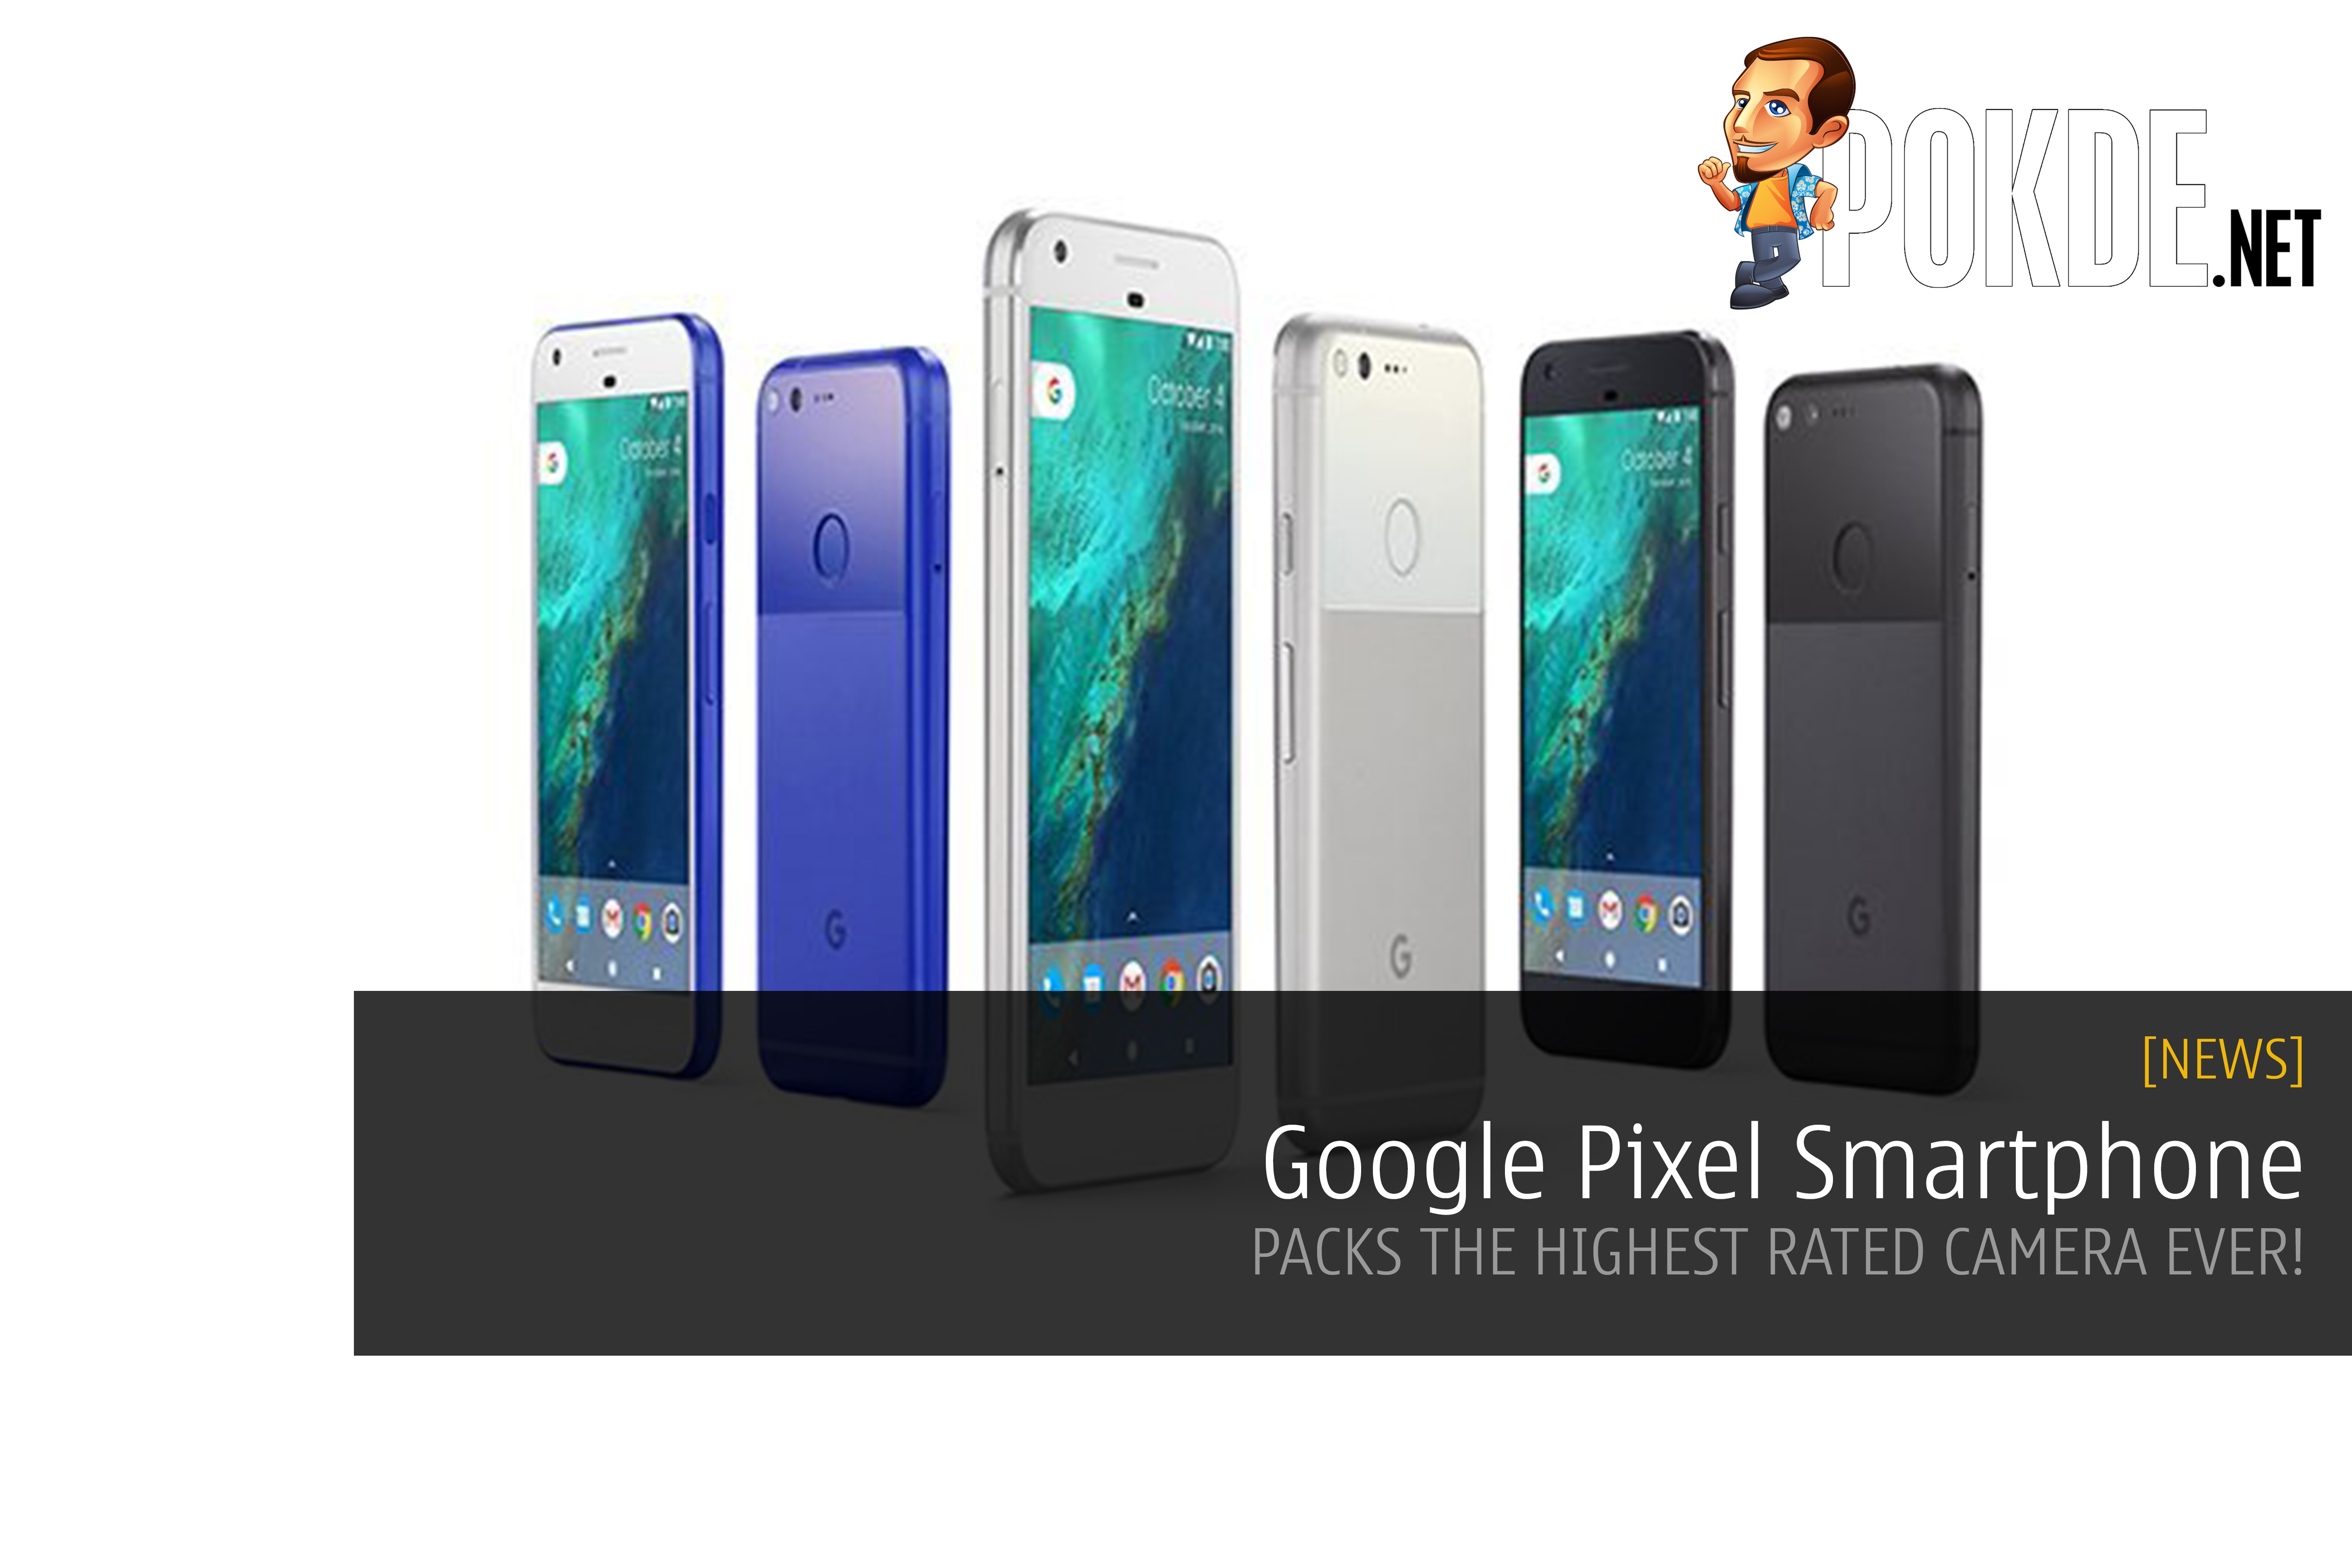 Google Pixel smartphone "made by Google" packs the highest rated camera ever 26